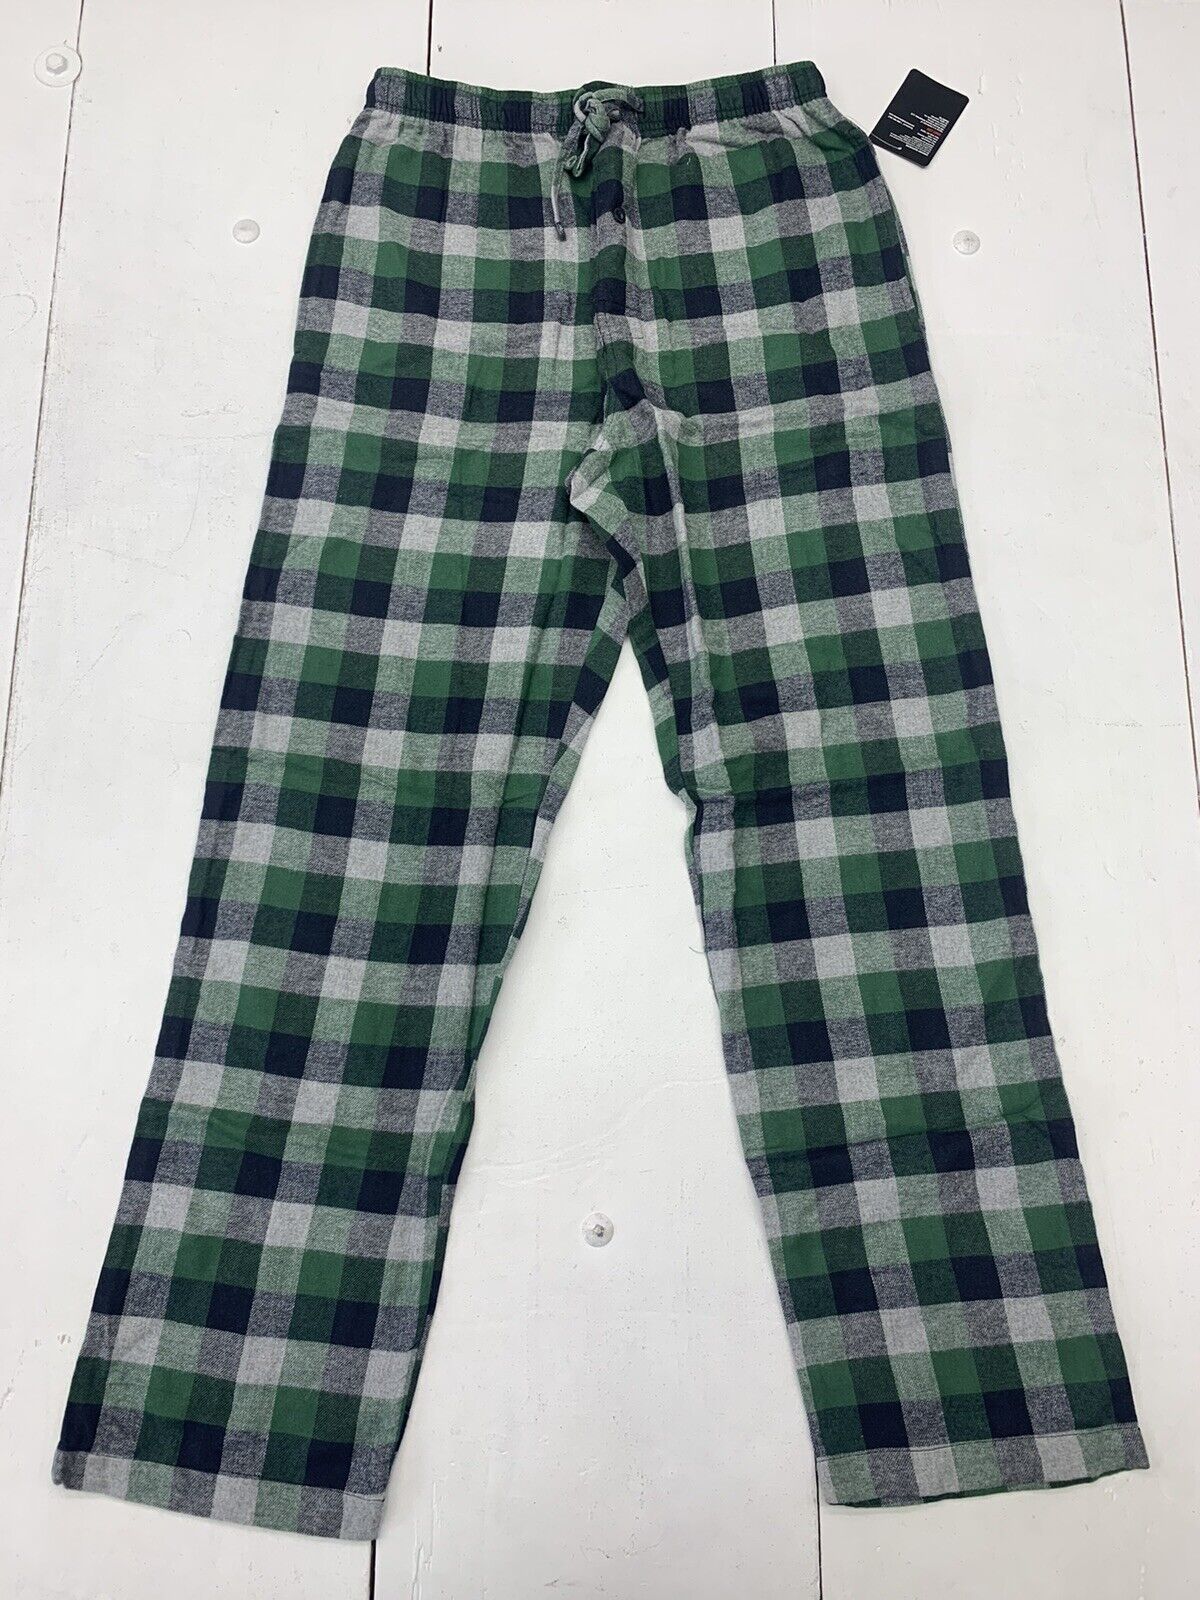 Hanes Mens Pajama Pants - JCPenney